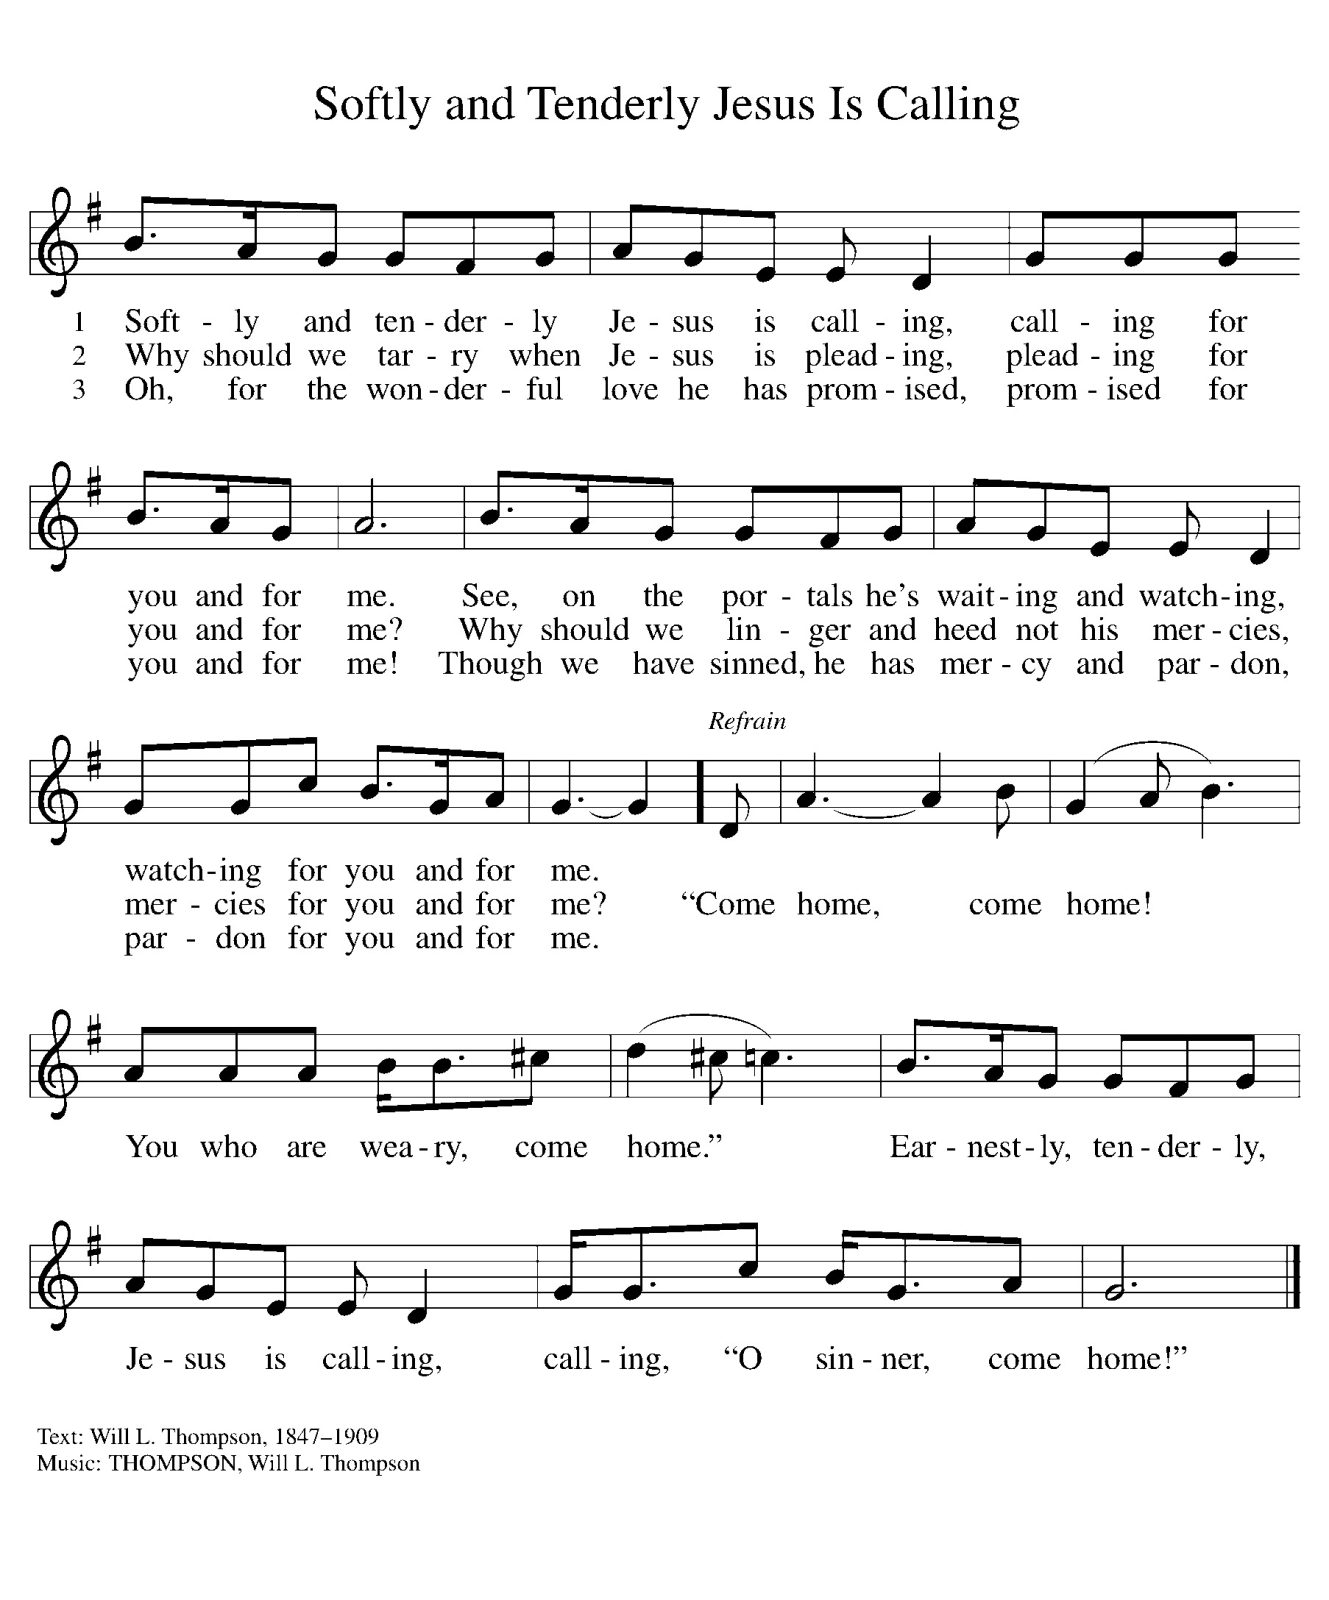 Softly and Tenderly Jesus Is Calling (Melody)